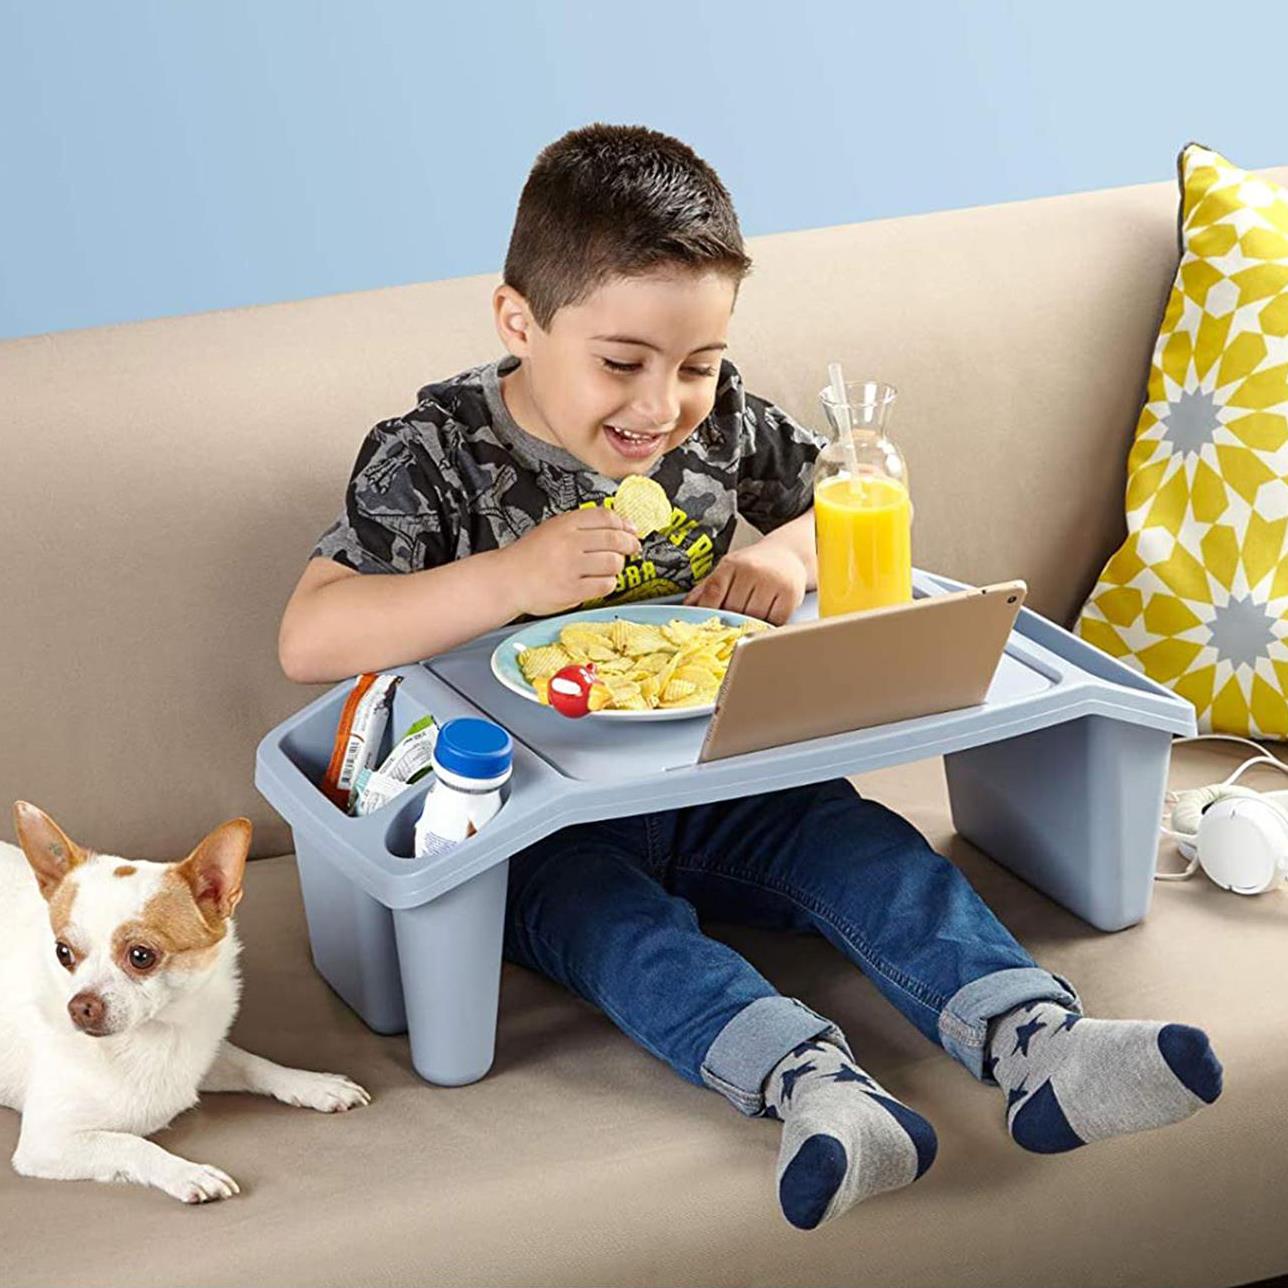 Portable Blue Bed Tray & Drink Holder by Geezy - The Magic Toy Shop